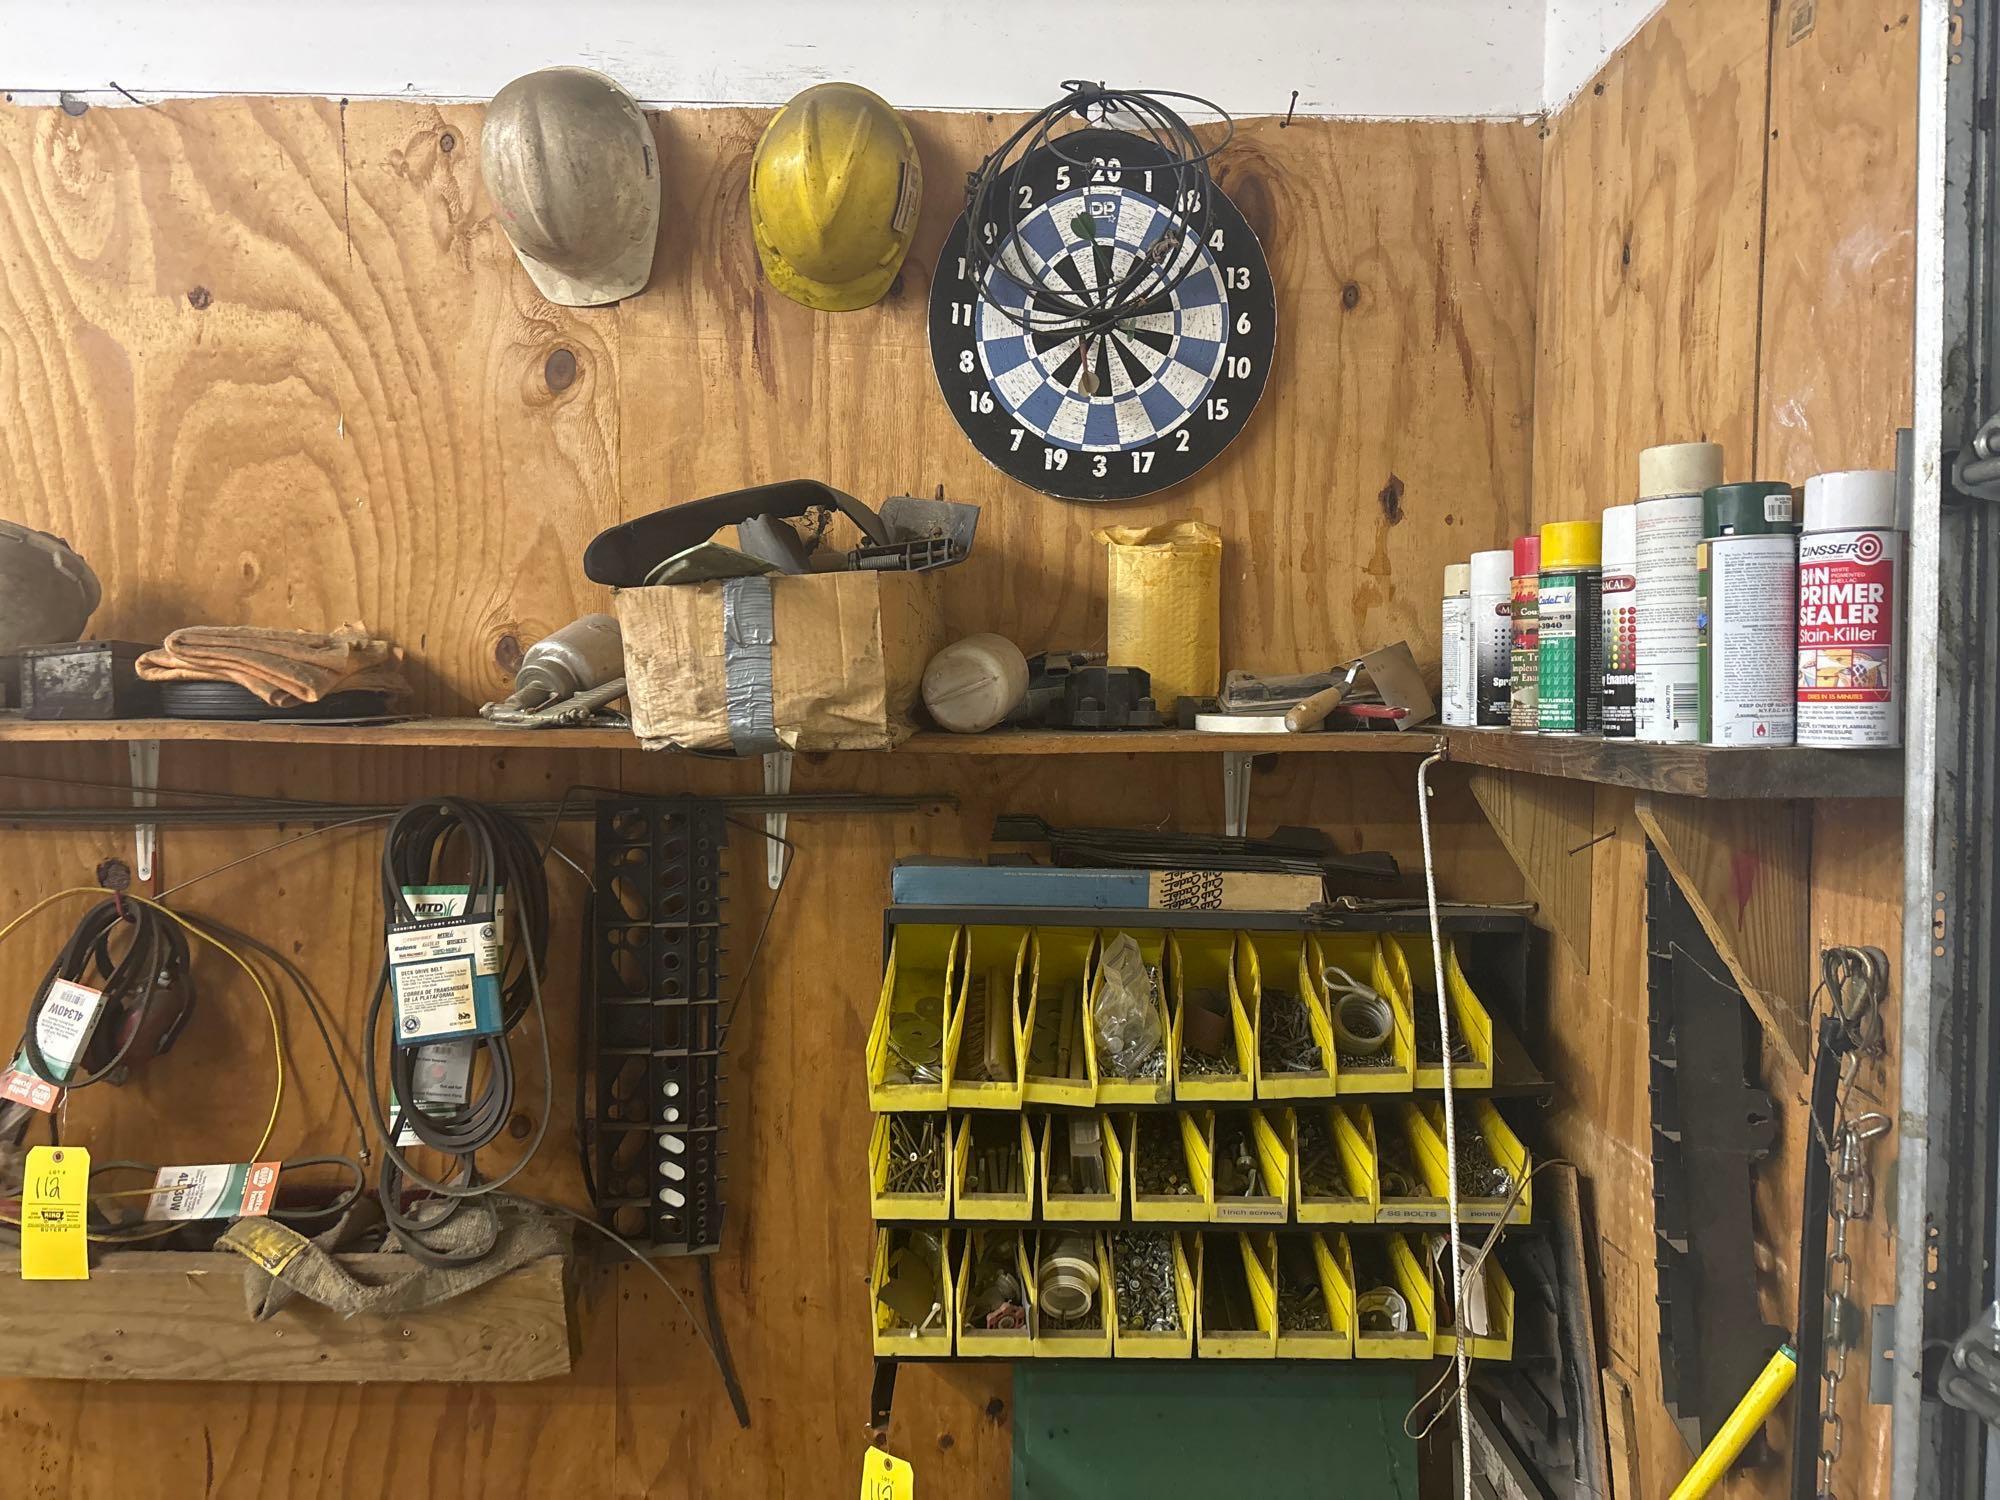 Belts - Lumber - Table - Misc Parts on Wall